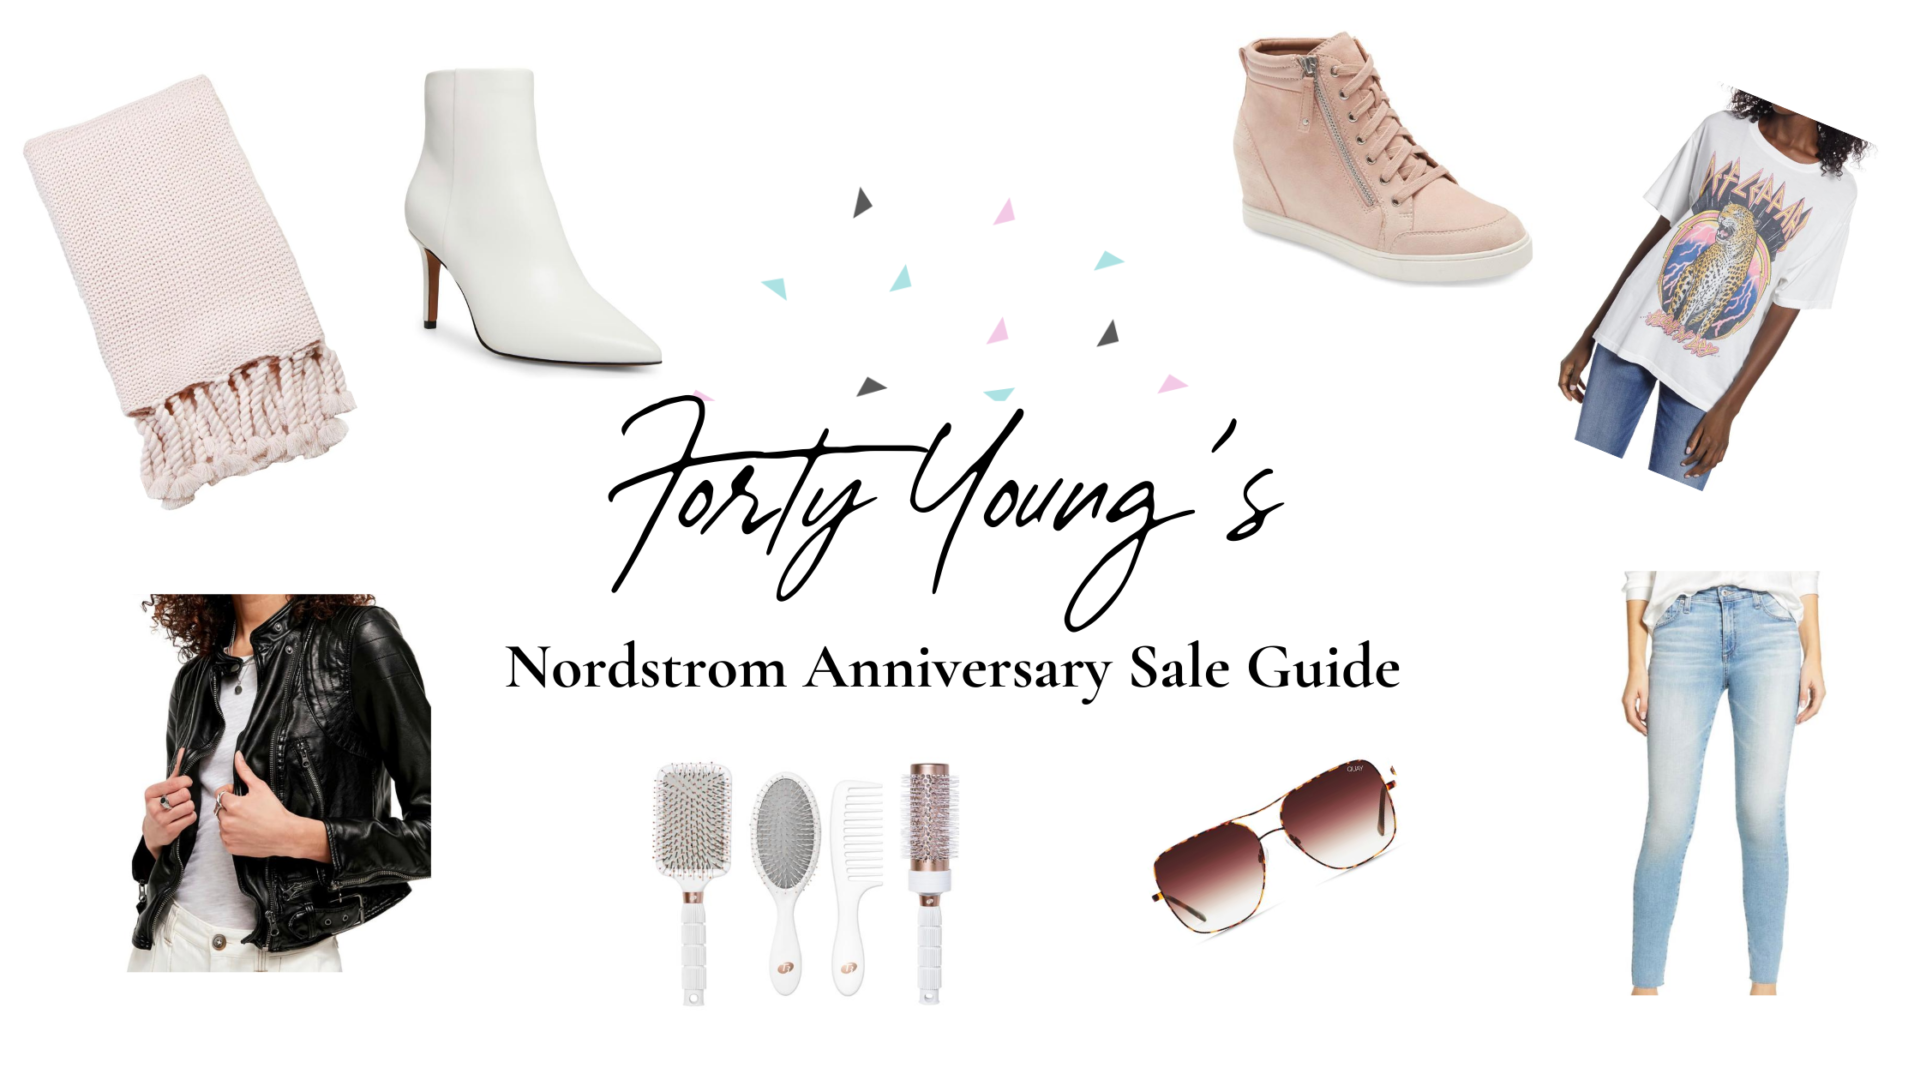 Forty Young’s Guide to the Nordstrom Anniversary Sale